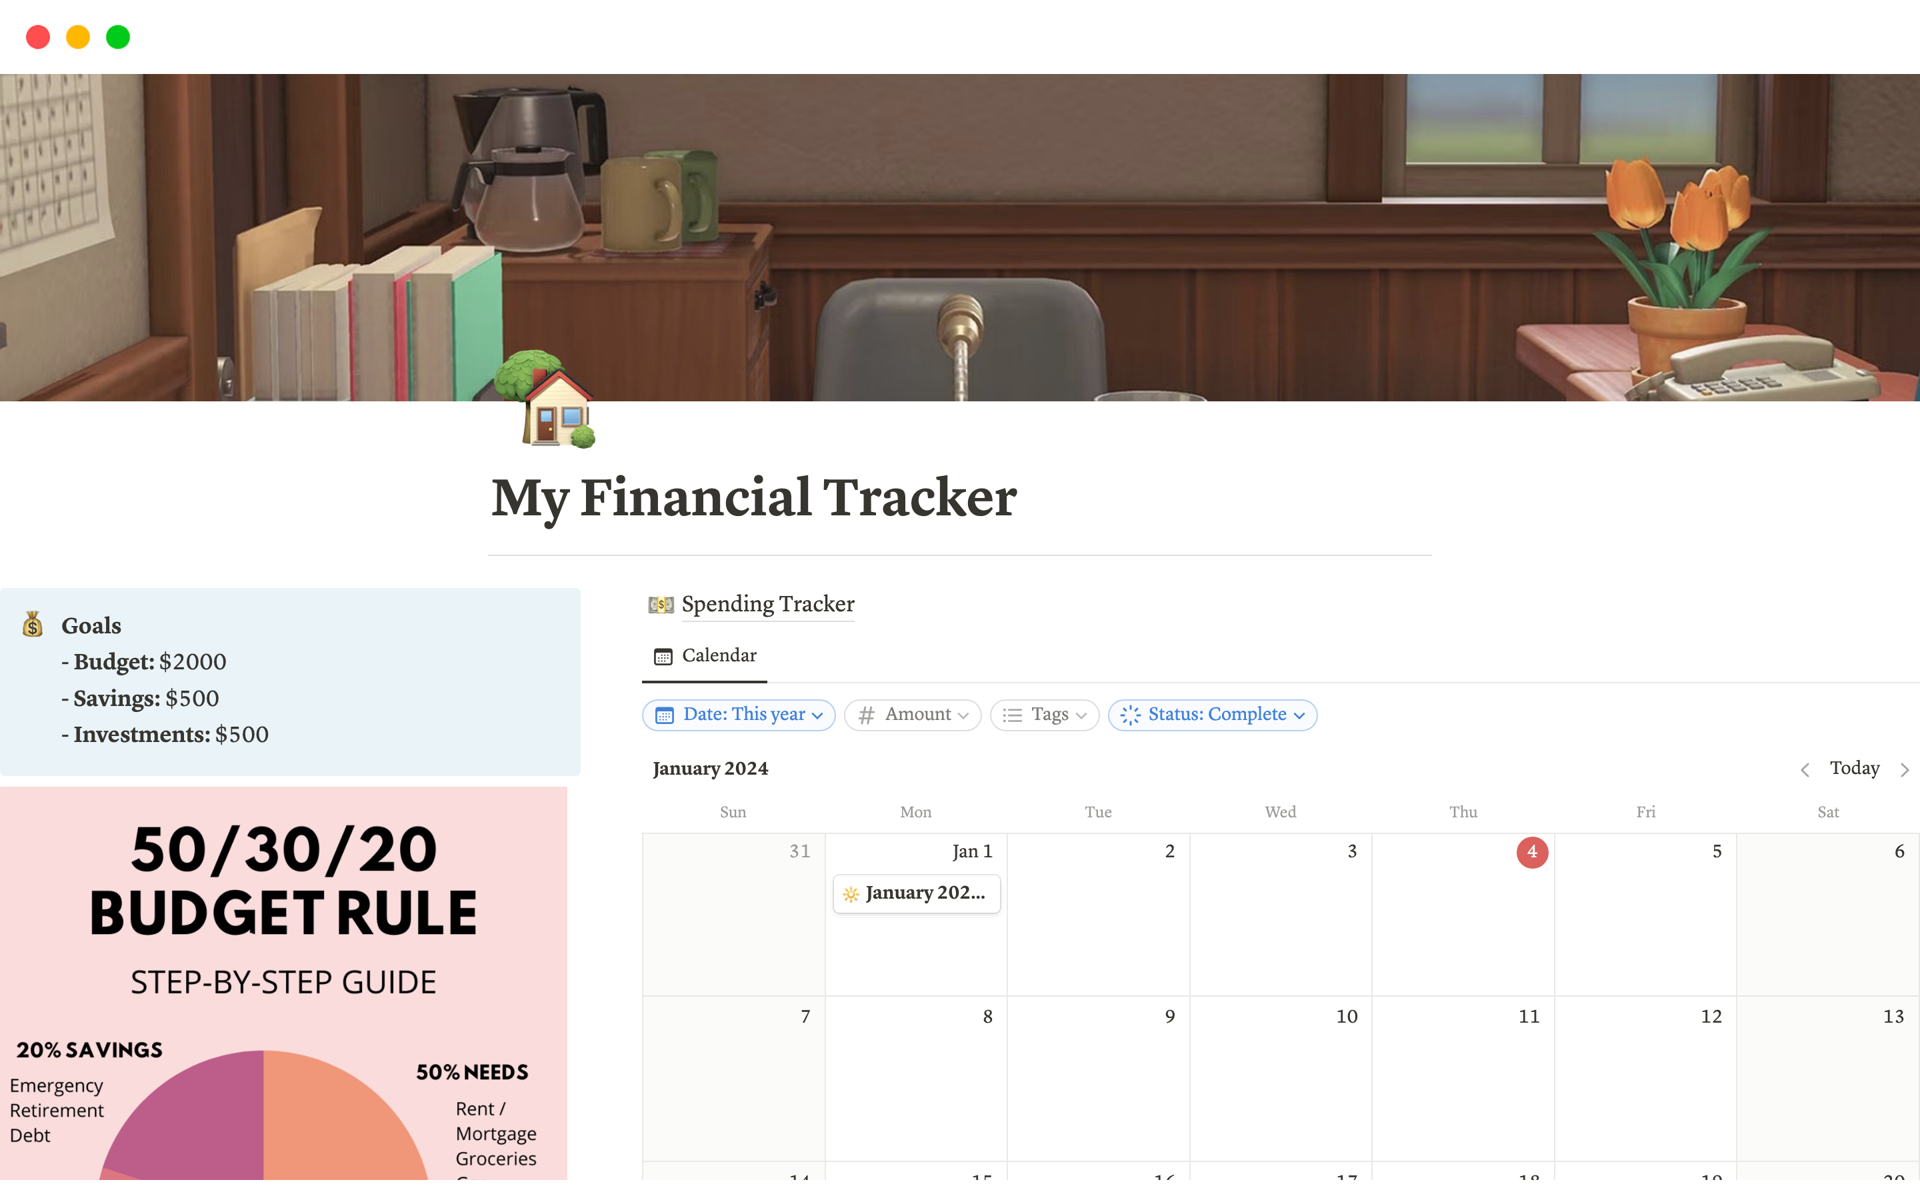 An aesthetic, intuitive, and user-friendly template designed for financial tracking and budgeting your spending.